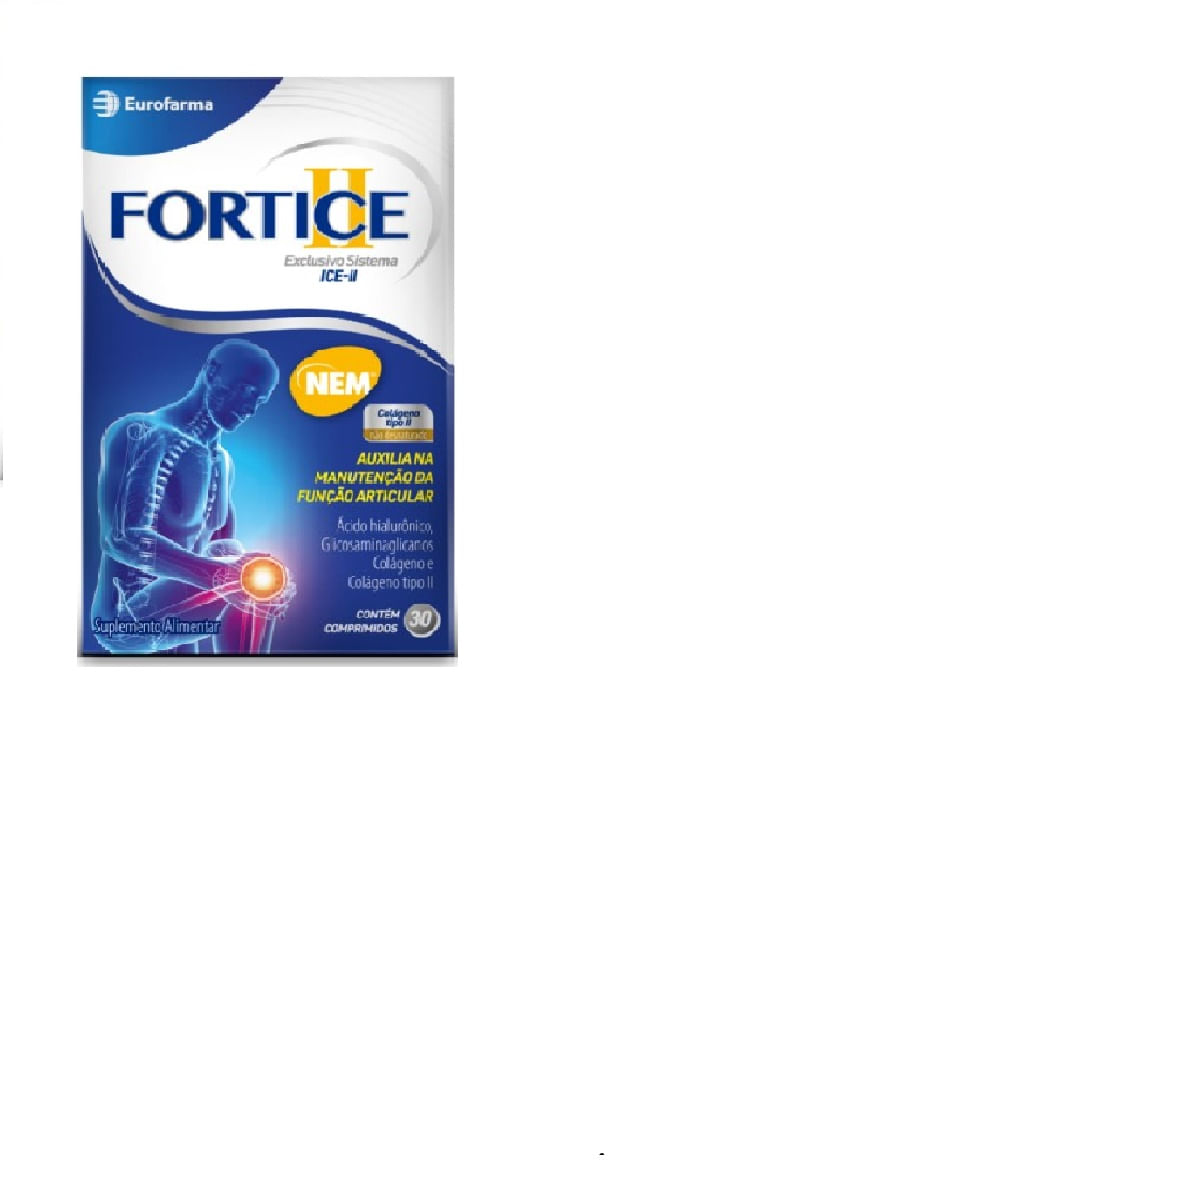 Fortice